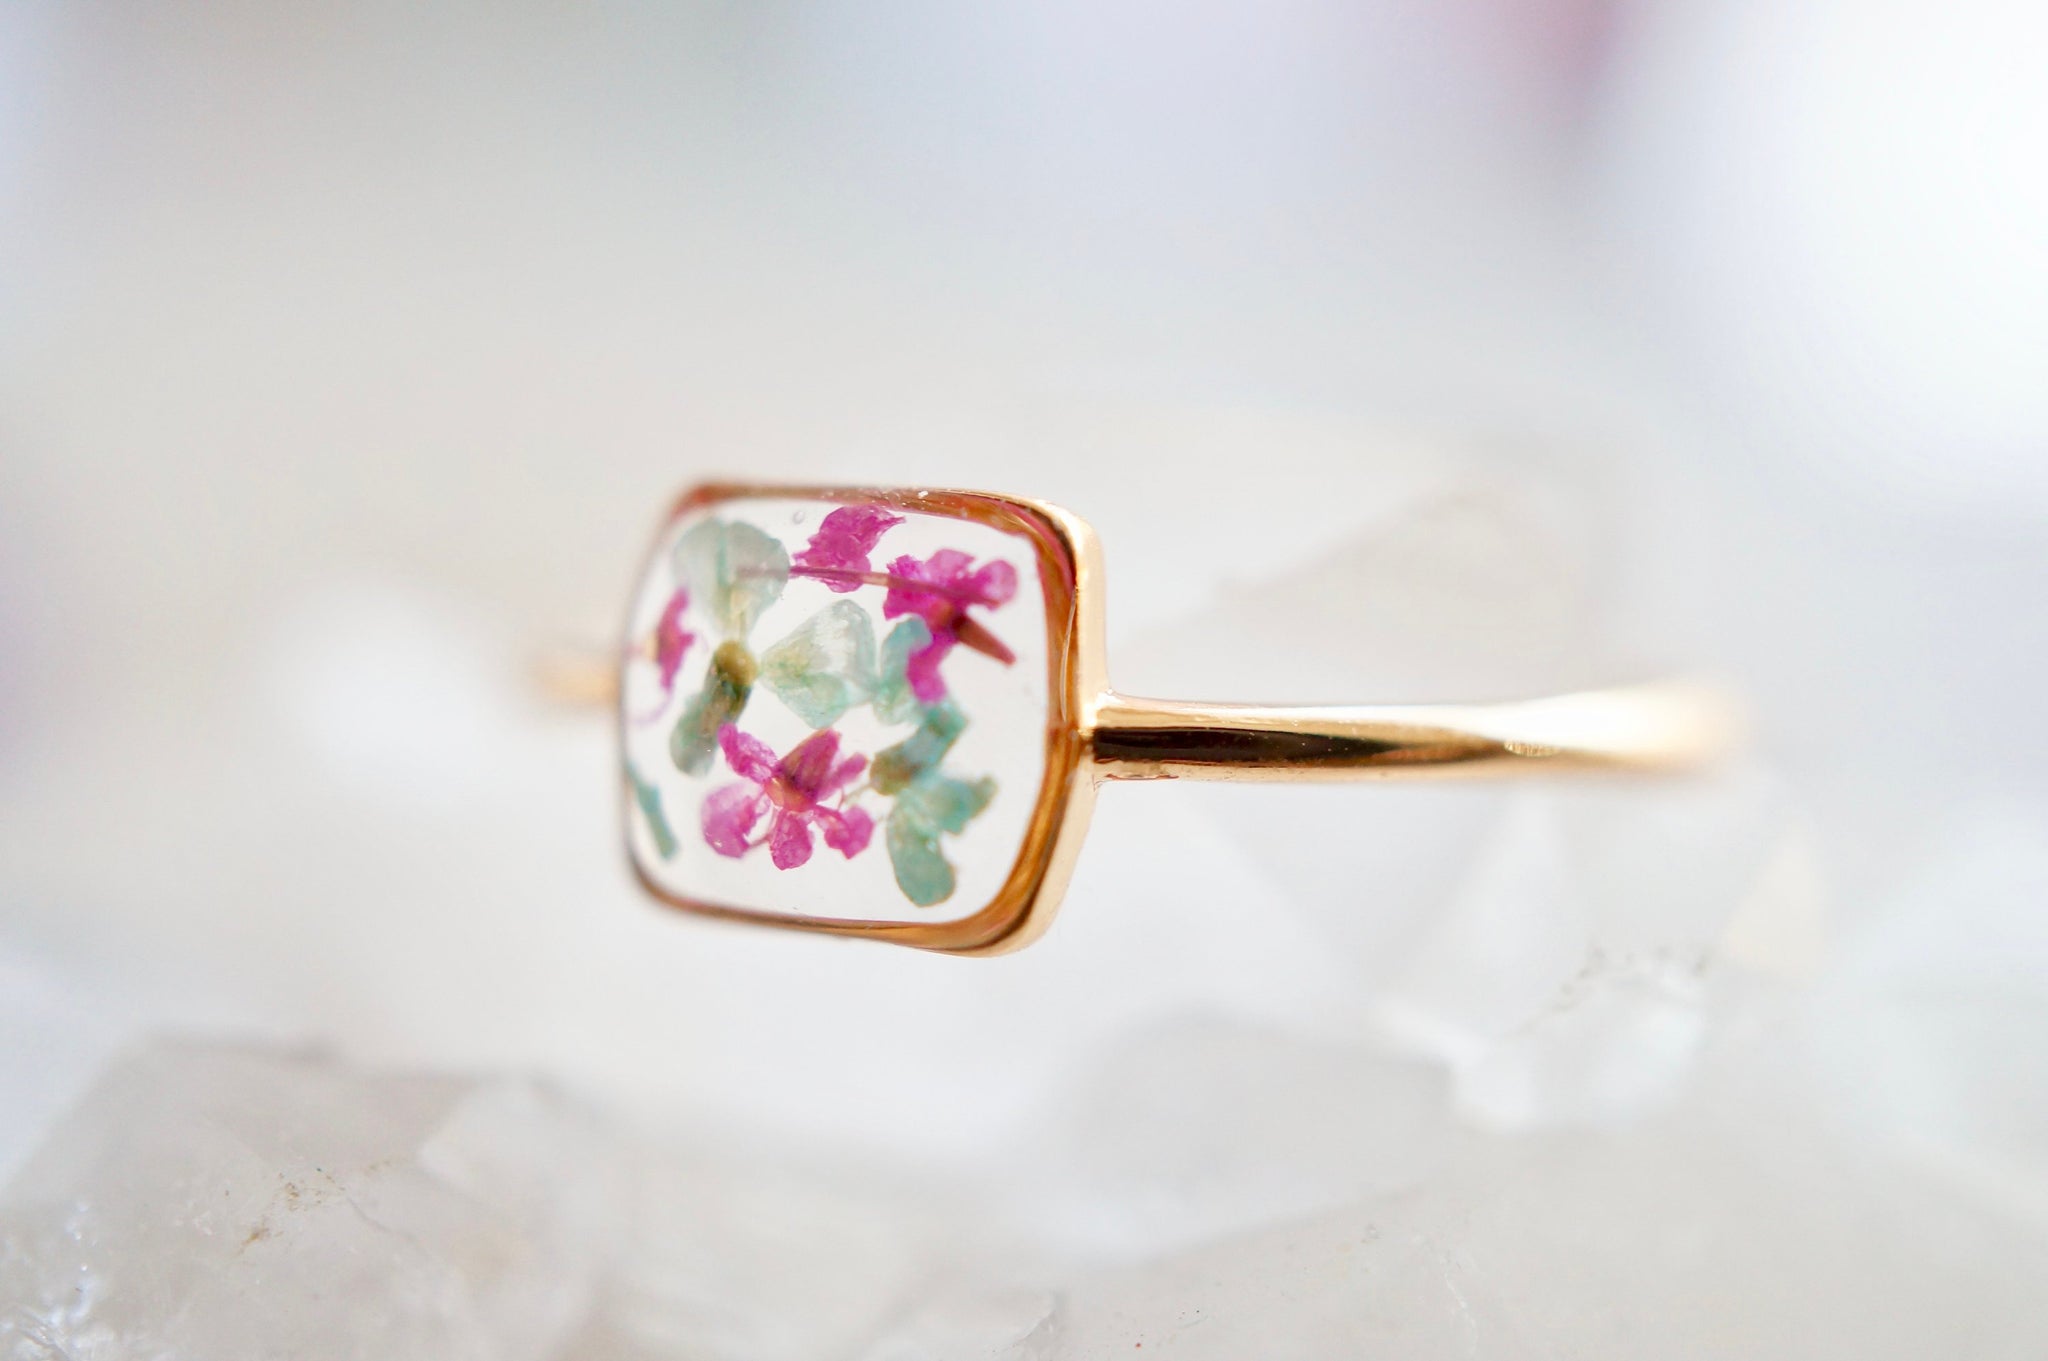 Clear Resin Ring Featuring Flower Accents. - One Size fits (87165)